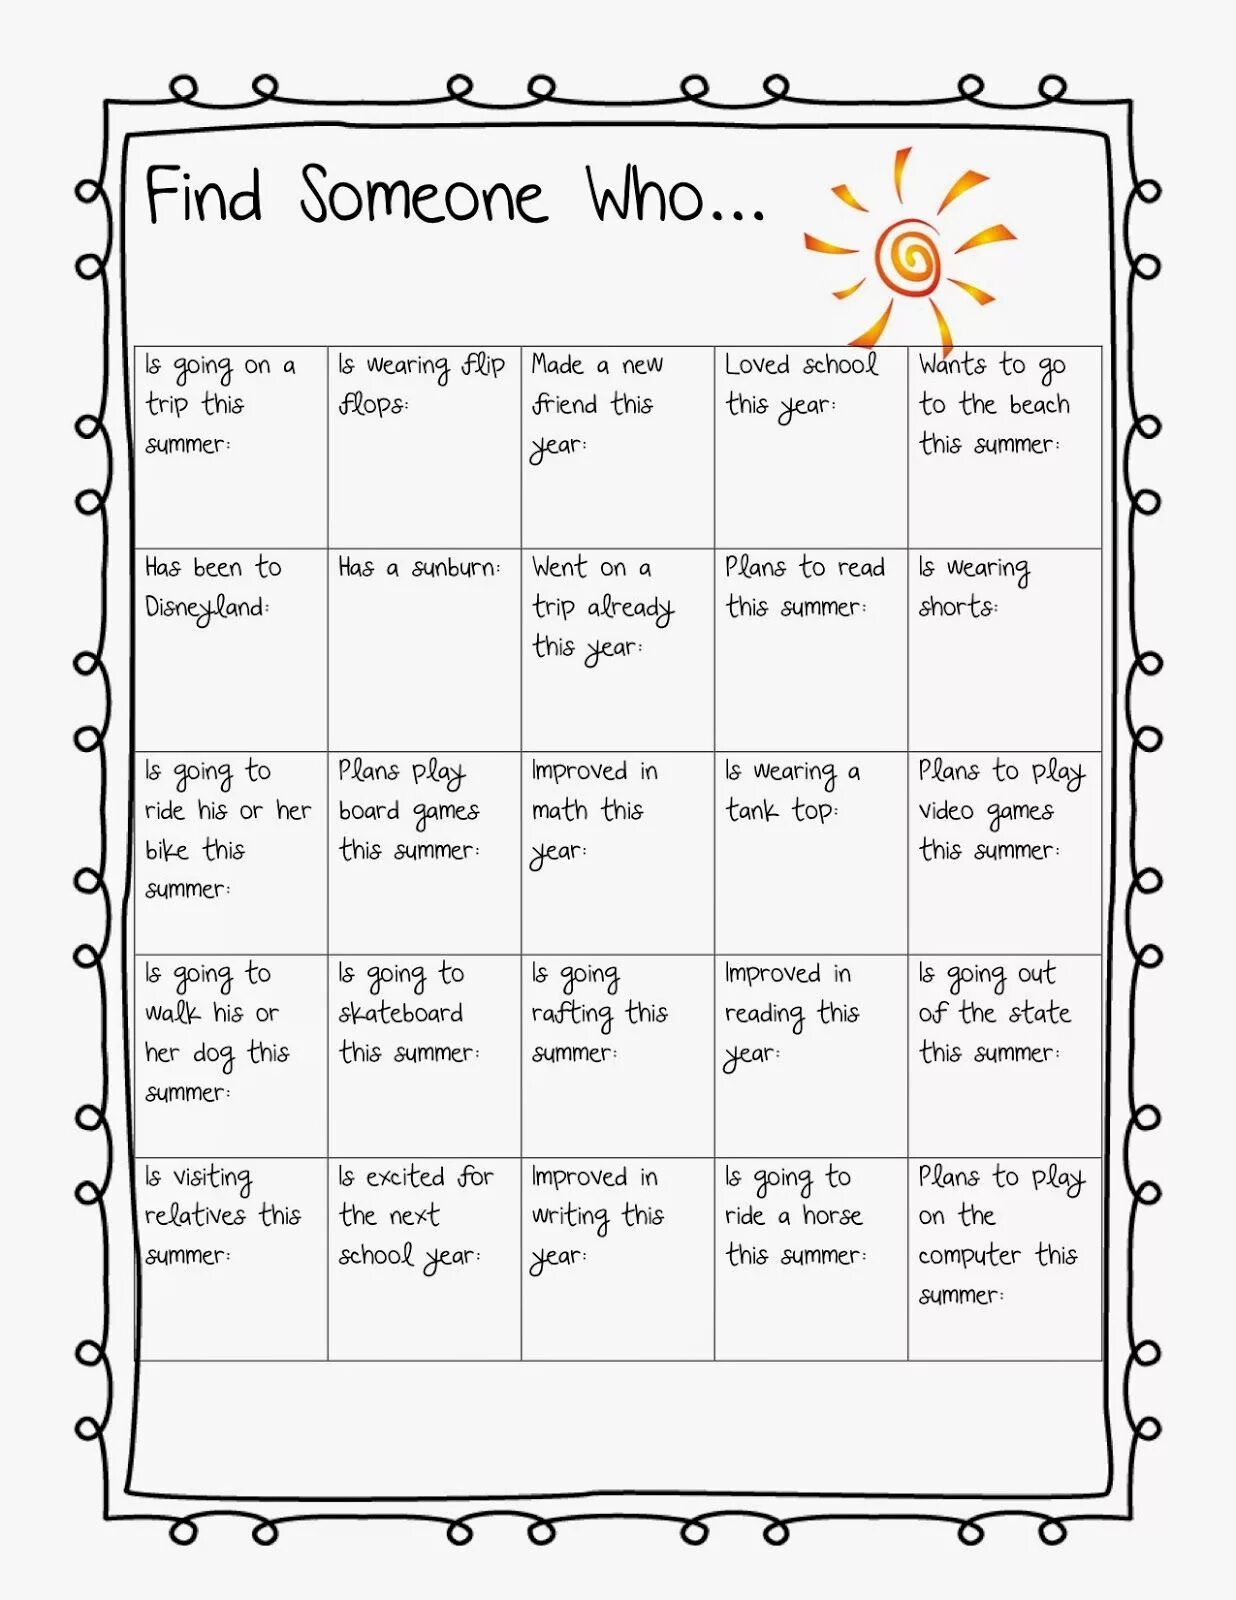 Last summer questions. Find someone who. Find someone who for Kids. Find someone who game. Find someone who Worksheet.